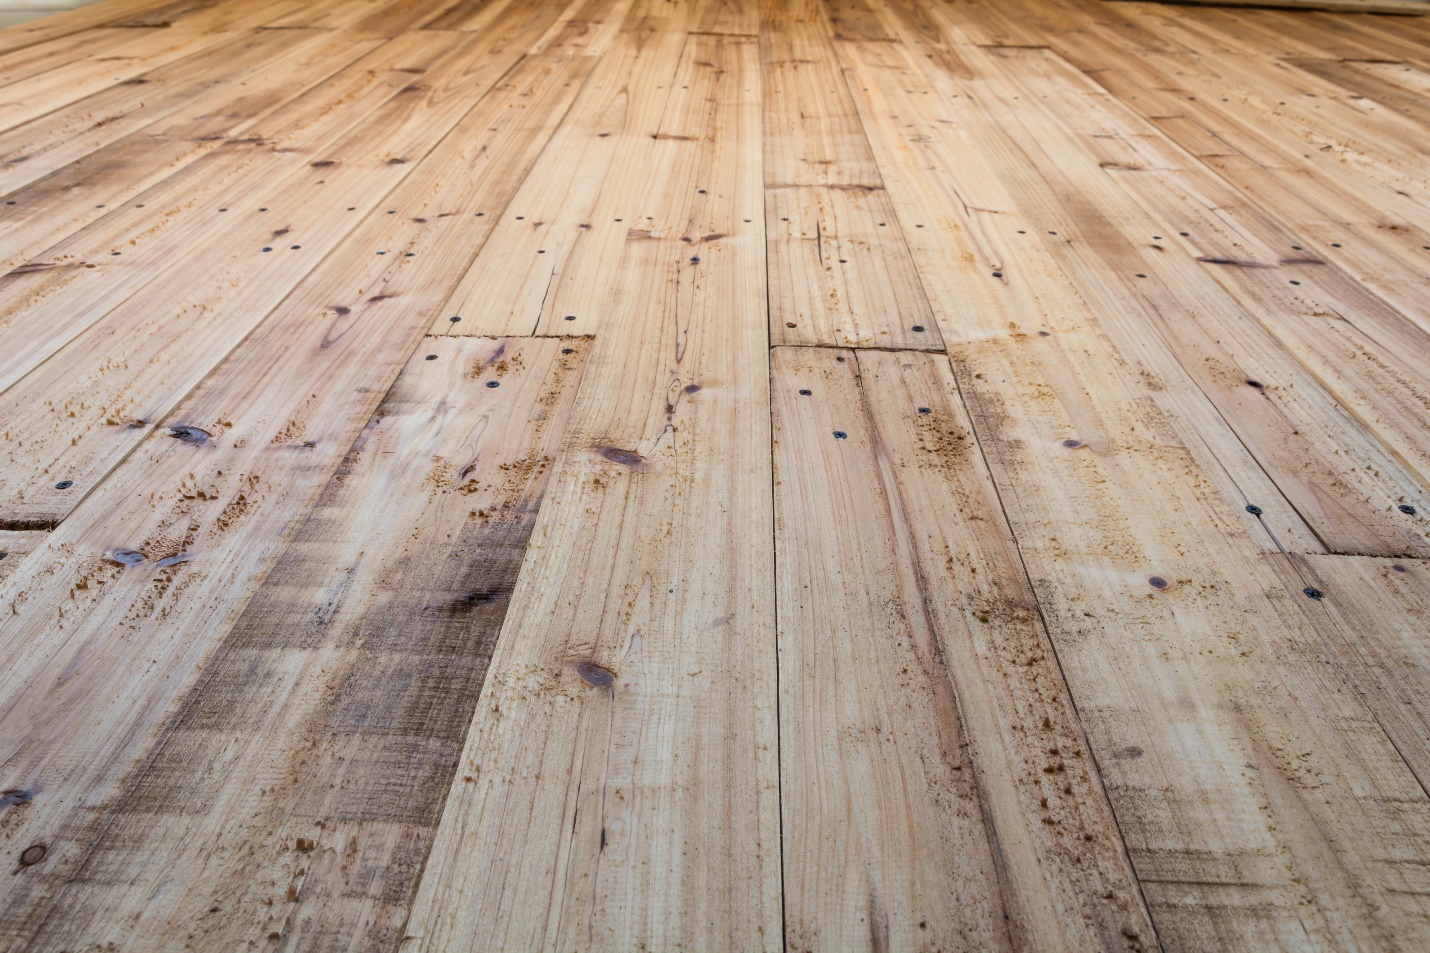 A close up of a wood floor

Description automatically generated with low confidence